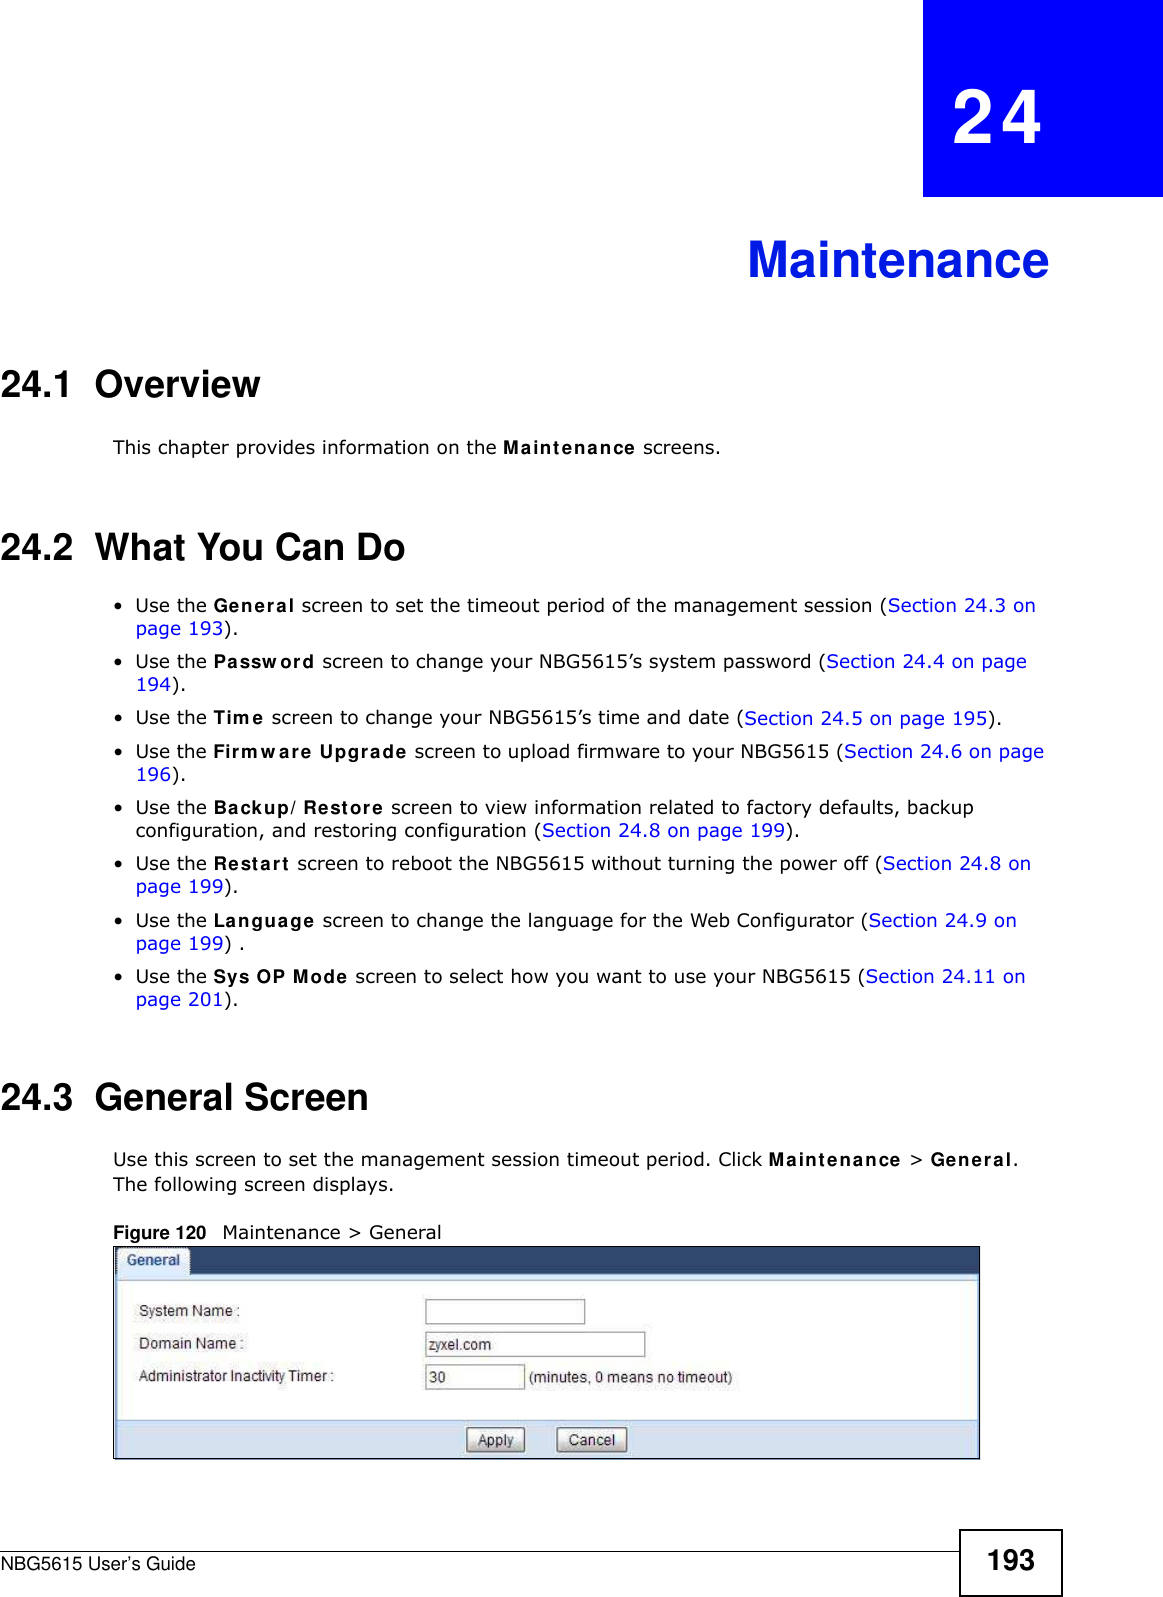 NBG5615 User’s Guide 193CHAPTER   24Maintenance24.1  OverviewThis chapter provides information on the Maintenance screens. 24.2  What You Can Do•Use the General screen to set the timeout period of the management session (Section 24.3 on page 193). •Use the Passw ord screen to change your NBG5615’s system password (Section 24.4 on page 194).•Use the Tim e screen to change your NBG5615’s time and date (Section 24.5 on page 195).•Use the Firmw are Upgrade screen to upload firmware to your NBG5615 (Section 24.6 on page 196).•Use the Backup/ Restore screen to view information related to factory defaults, backup configuration, and restoring configuration (Section 24.8 on page 199).•Use the Restart screen to reboot the NBG5615 without turning the power off (Section 24.8 on page 199).•Use the Language screen to change the language for the Web Configurator (Section 24.9 on page 199) .•Use the Sys OP Mode screen to select how you want to use your NBG5615 (Section 24.11 on page 201). 24.3  General Screen Use this screen to set the management session timeout period. Click Maintenance &gt; General. The following screen displays.Figure 120   Maintenance &gt; General 